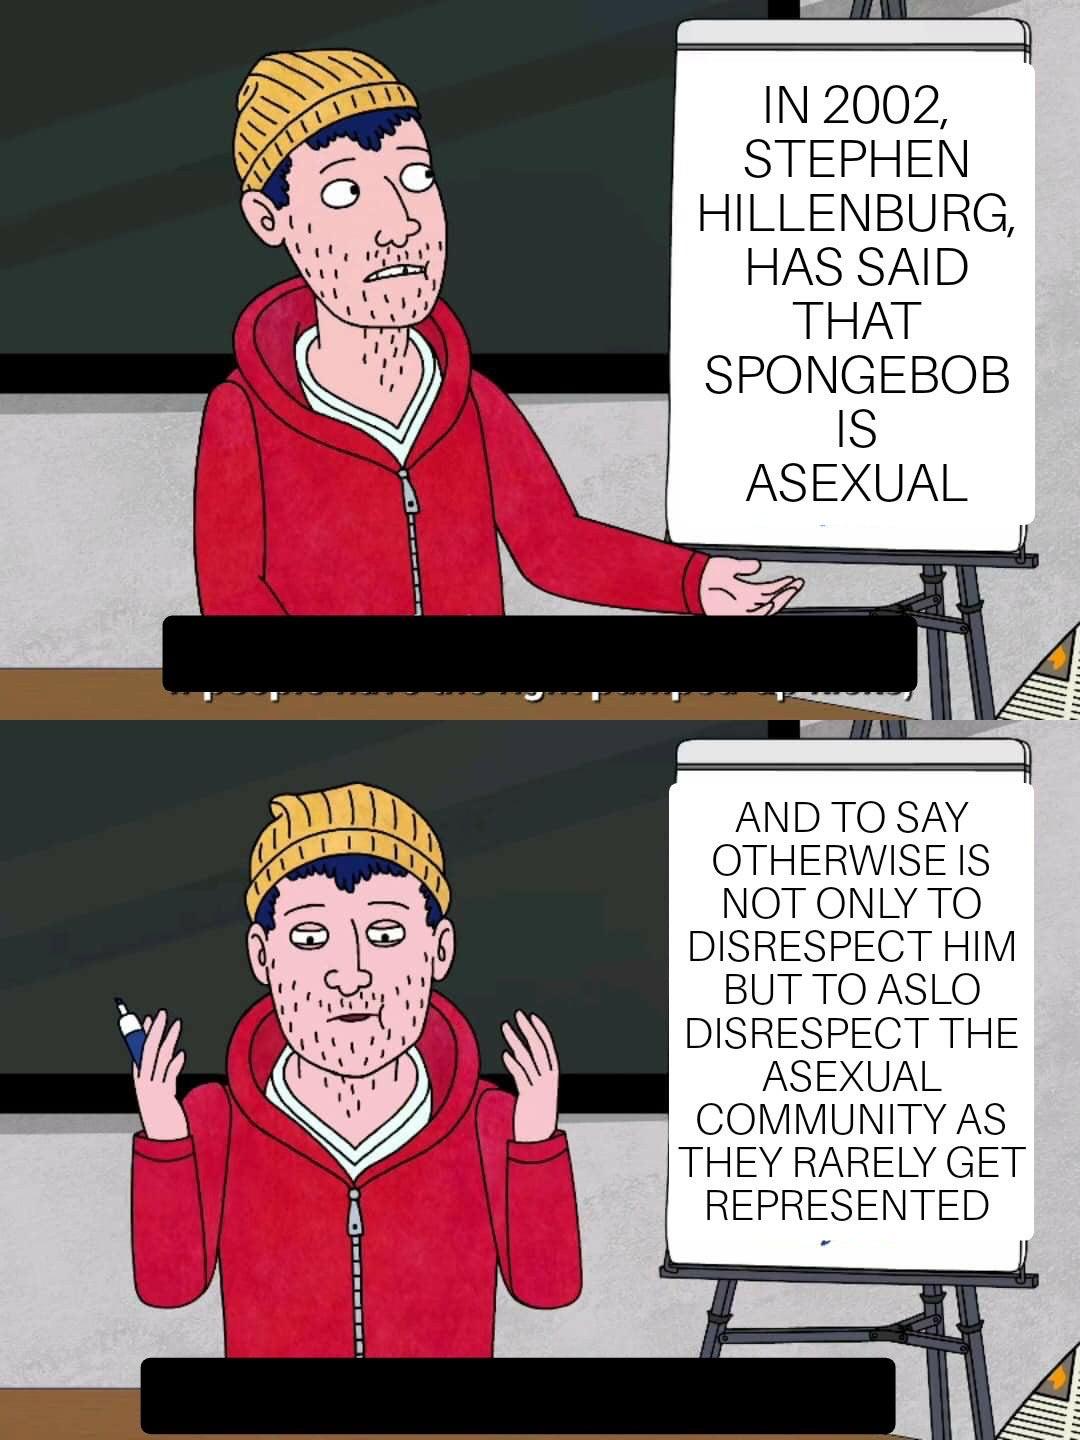 Spongebob, Spongebob, Todd, Nickelodeon, SpongeBob, Hillenburg Spongebob Memes Spongebob, Spongebob, Todd, Nickelodeon, SpongeBob, Hillenburg text: IN 2002, STEPHEN HILLENBURG, HAS SAID THAT SPONGEBOB ASEXUAL AND TO SAY OTHERWISE IS NOT ONLY TO DISRESPECT HIM BUT TO ASLO DISRESPECT THE ASEXUAL COMMUNITY AS THEY RARELY GET REPRESENTED 